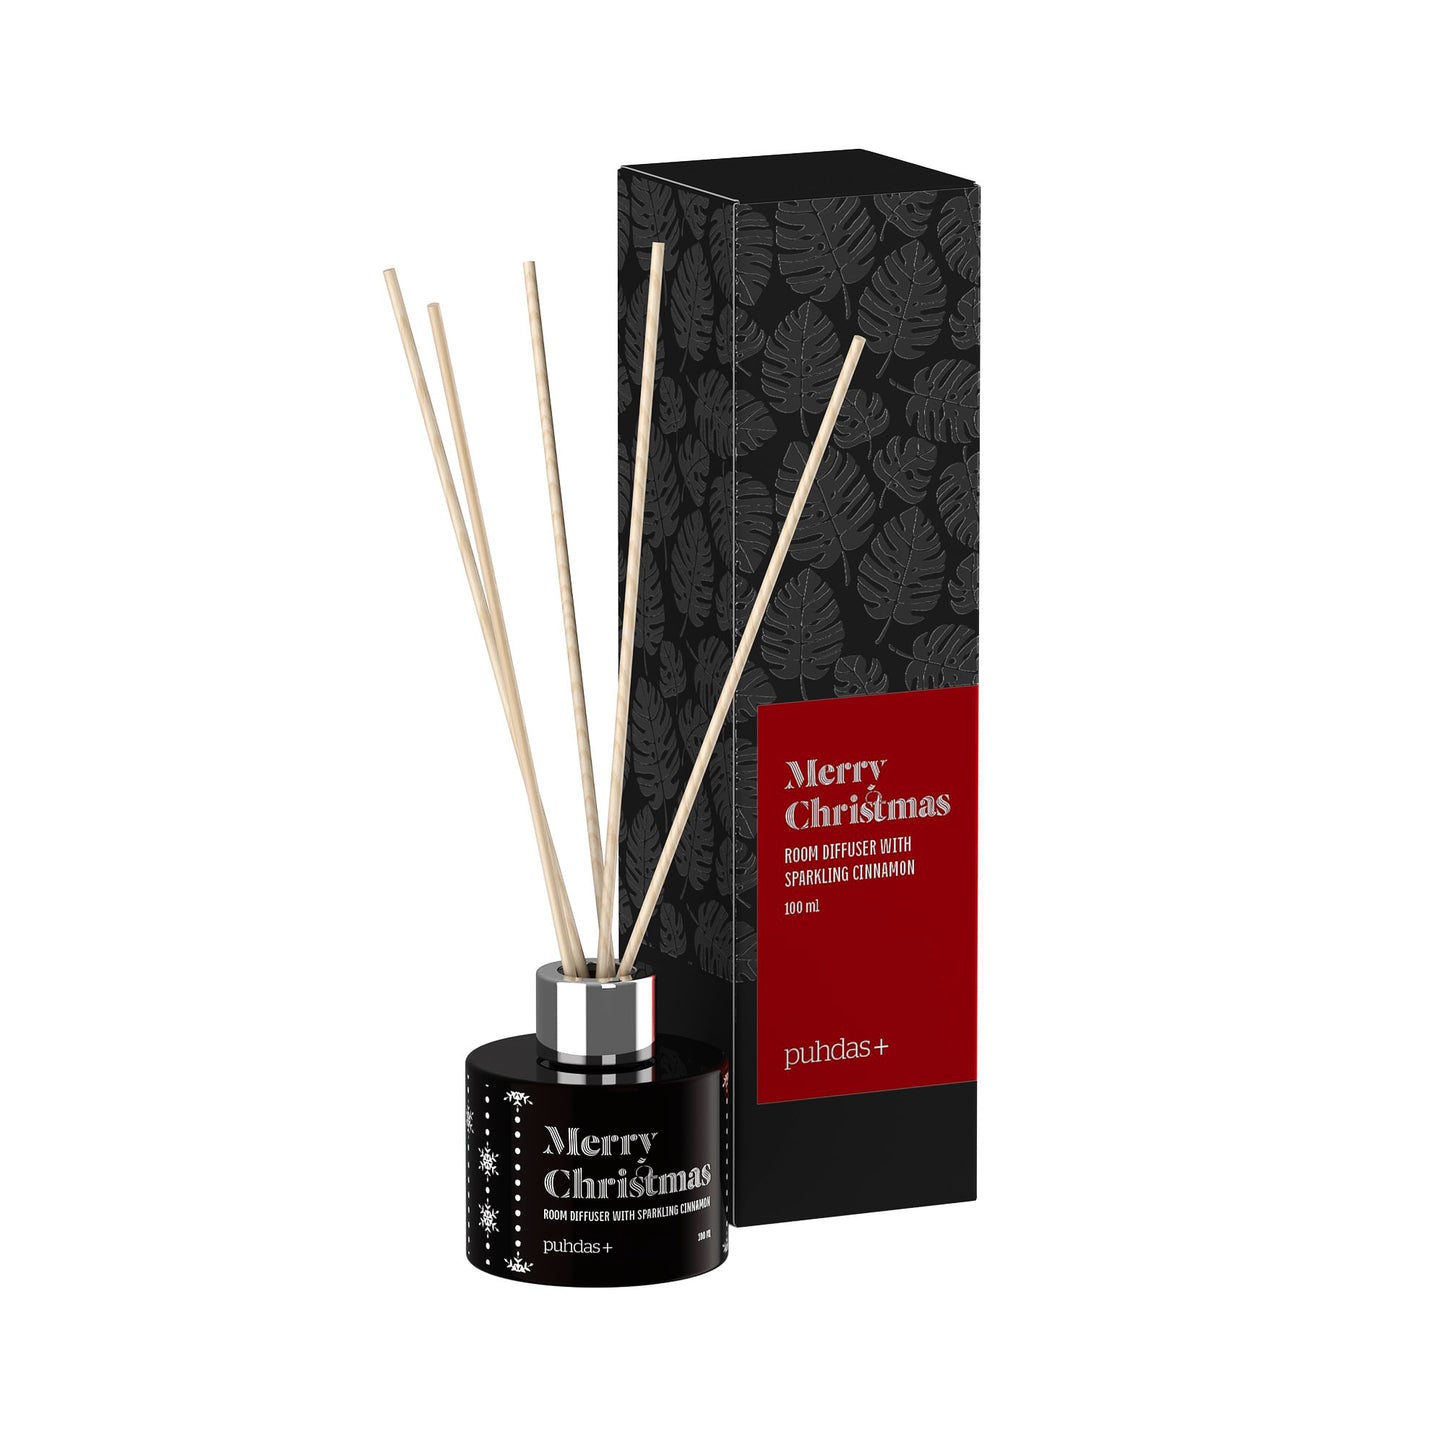 Merry Christmas Room Diffuser 100 ml